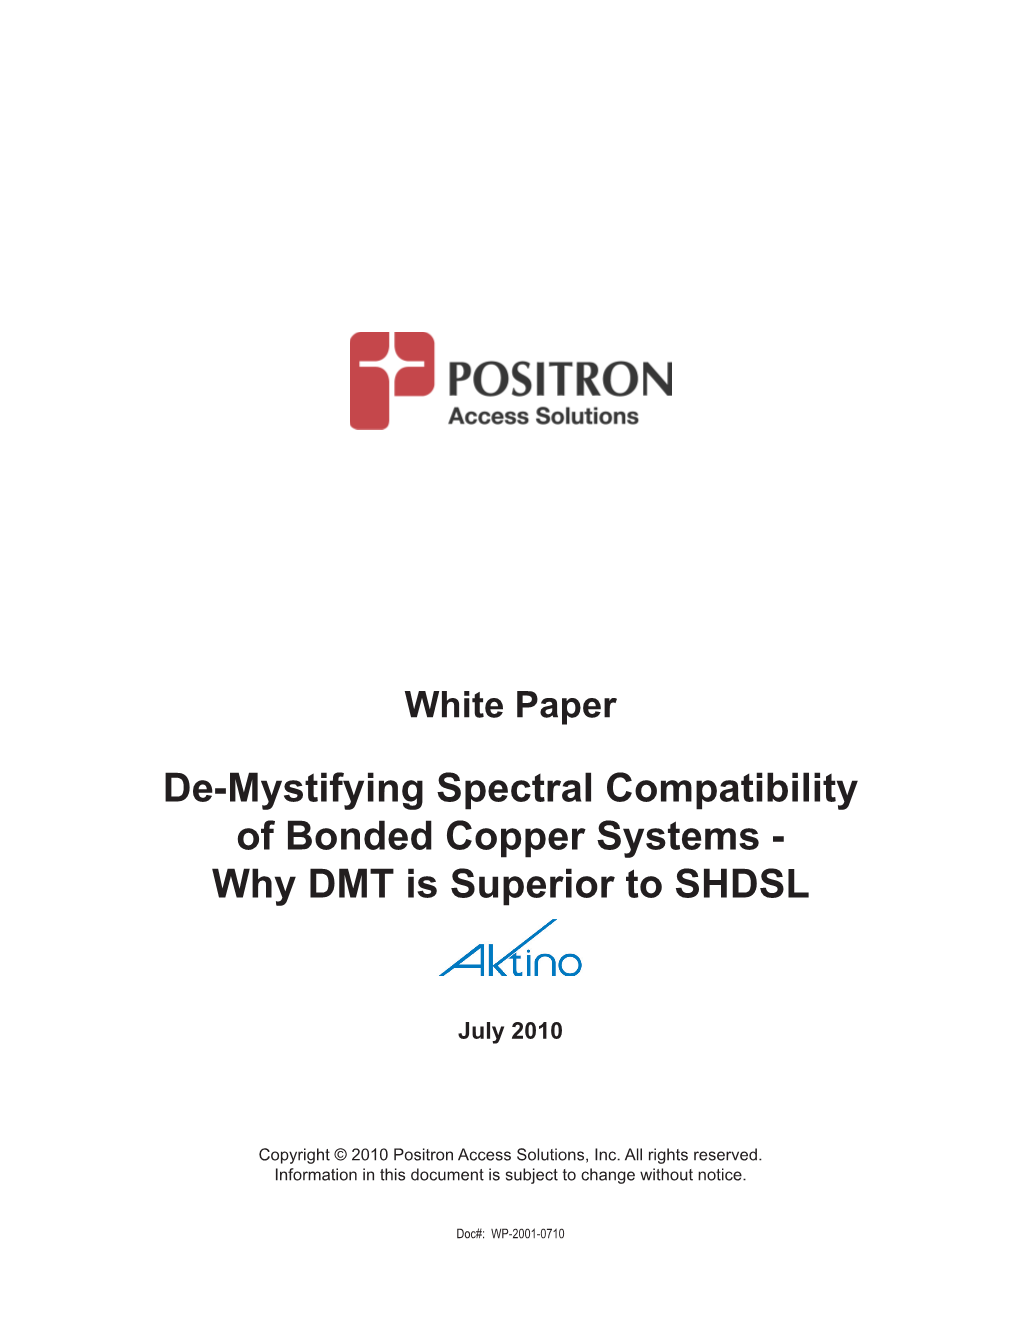 De-Mystifying Spectral Compatibility of Bonded Copper Systems - Why DMT Is Superior to SHDSL